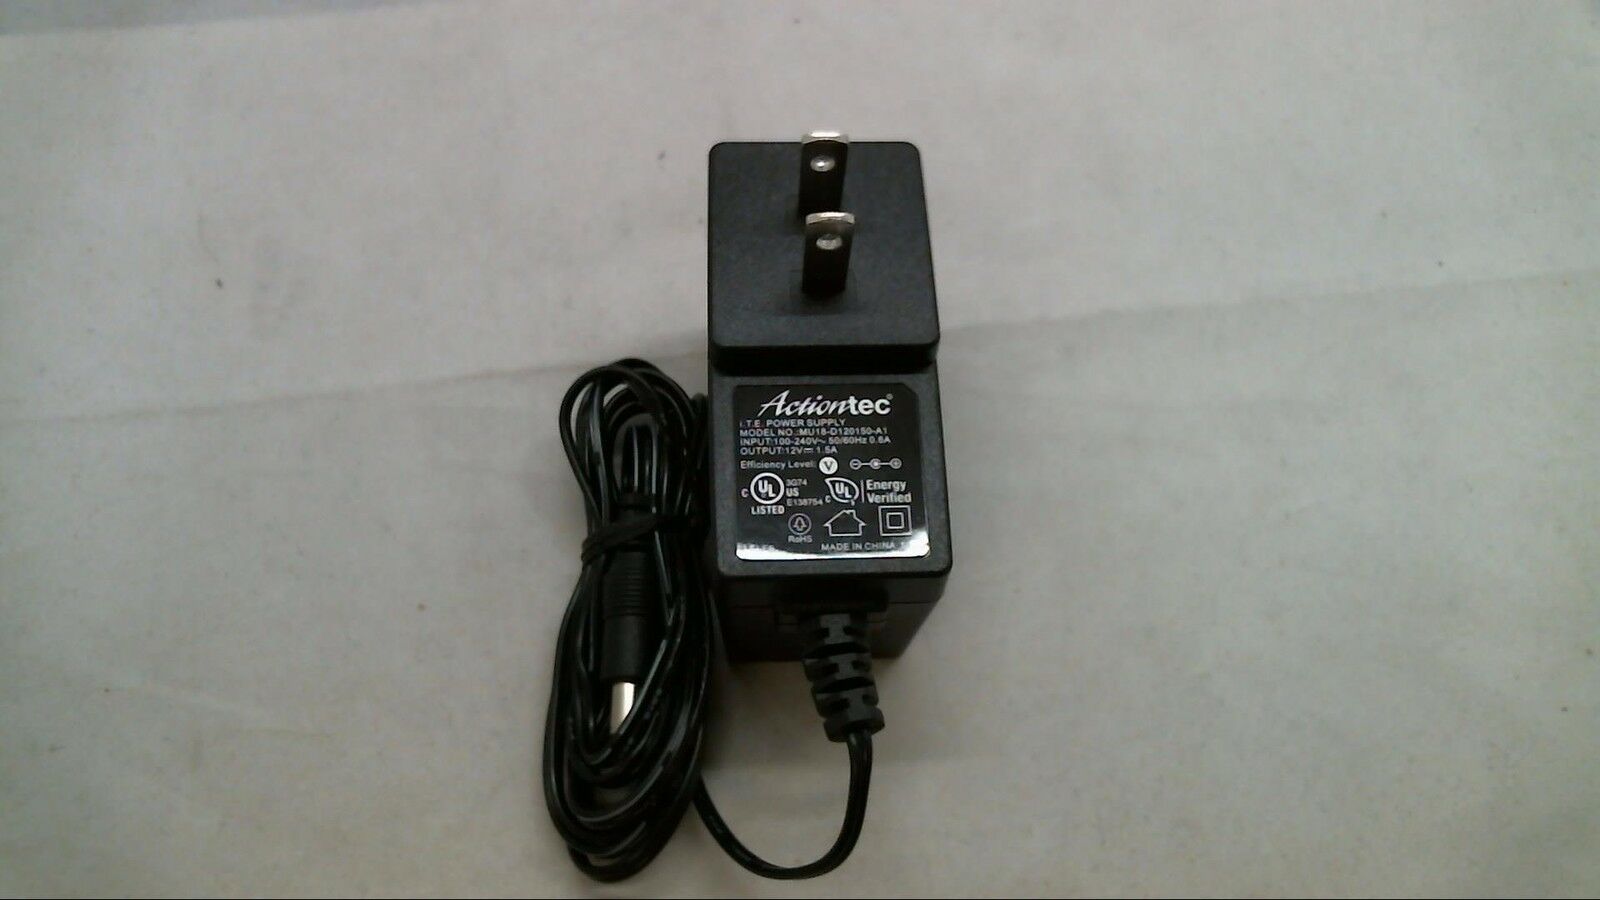 Actiontec AC ADAPTER FOR ZYXEL Q1000Z ONLY FAST DLV MU18-D120150-A1 12V 1.5A Brand: Action-Tec Mod